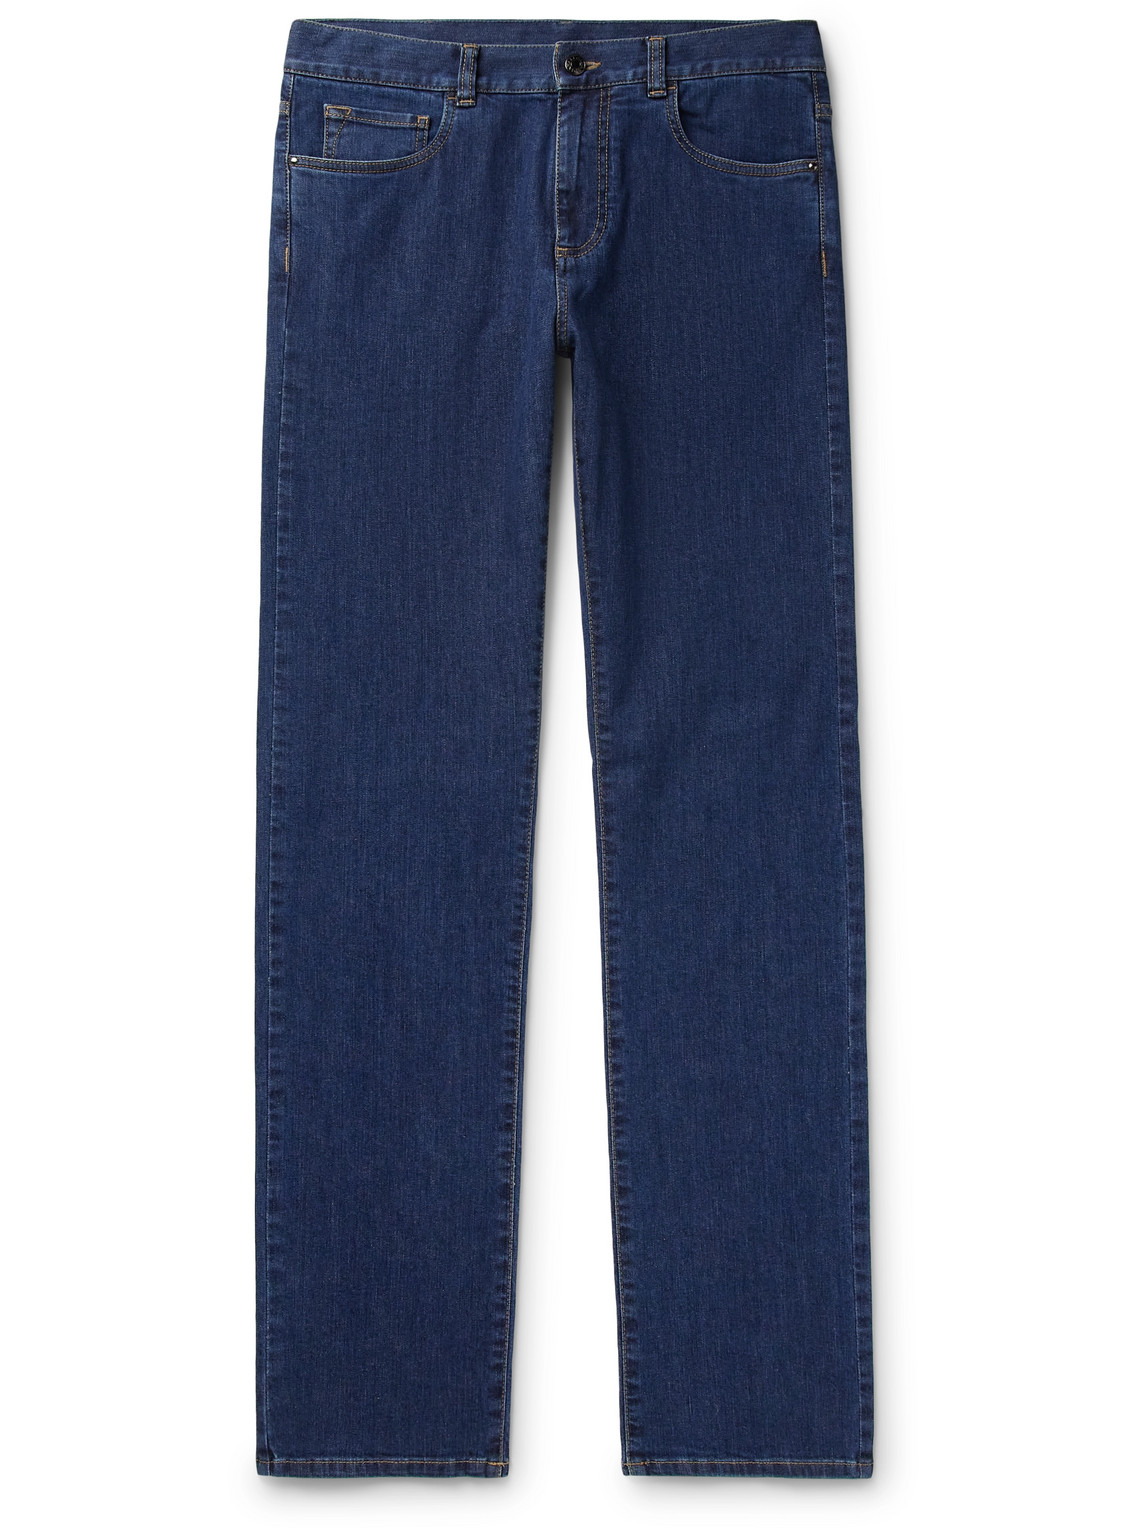 Canali Stretch New Straight Fit Jeans In Blue Denim